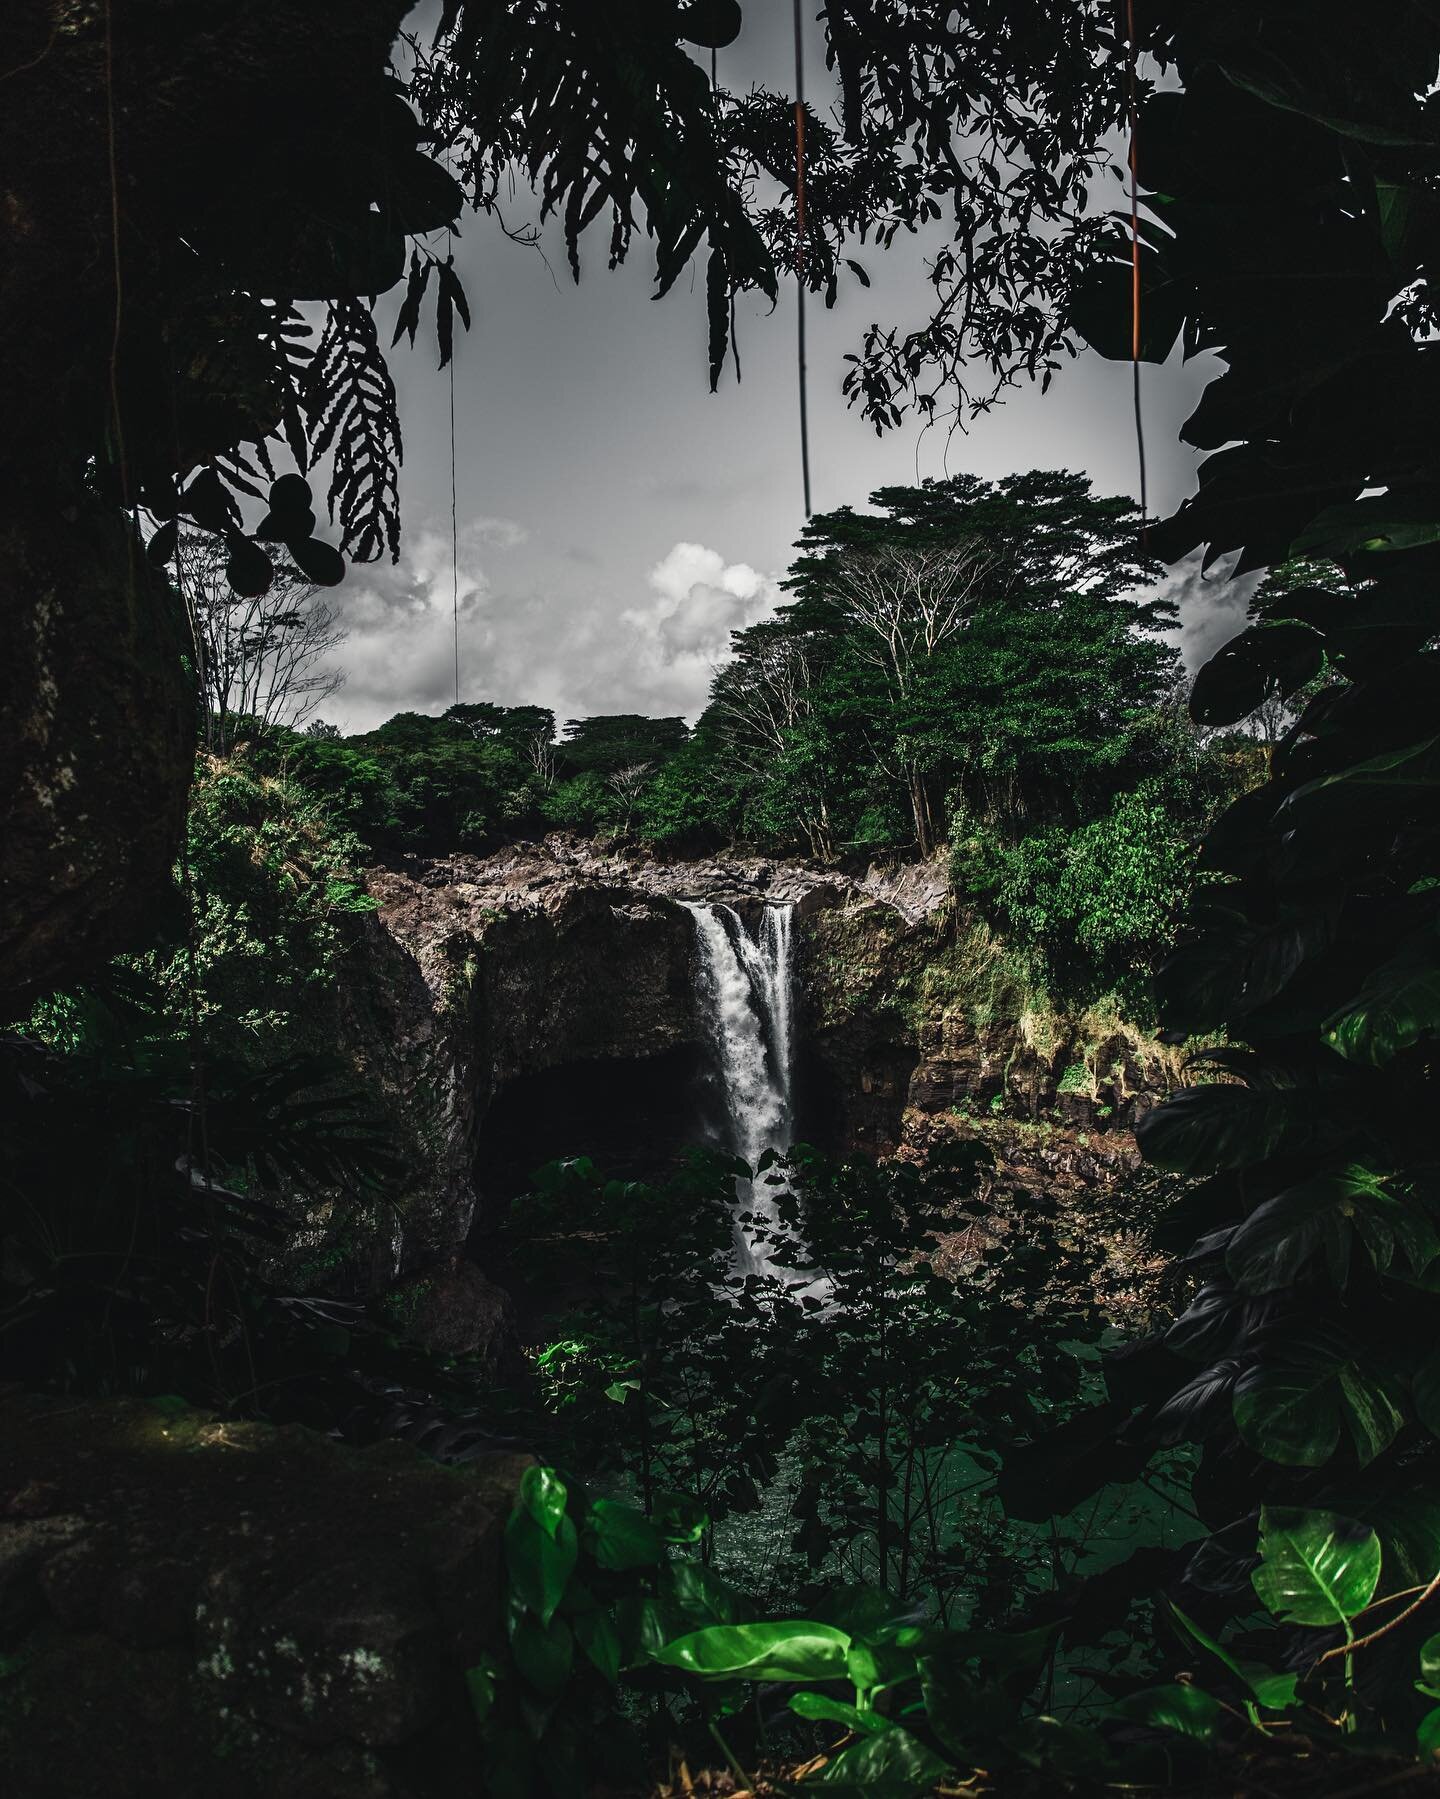 The feel when you went to Rainbow Falls and didn&rsquo;t see a rainbow 🥺🌈🌴
&mdash;
@canonusa 6D Mark II
@canonusa 24-104mm f/4